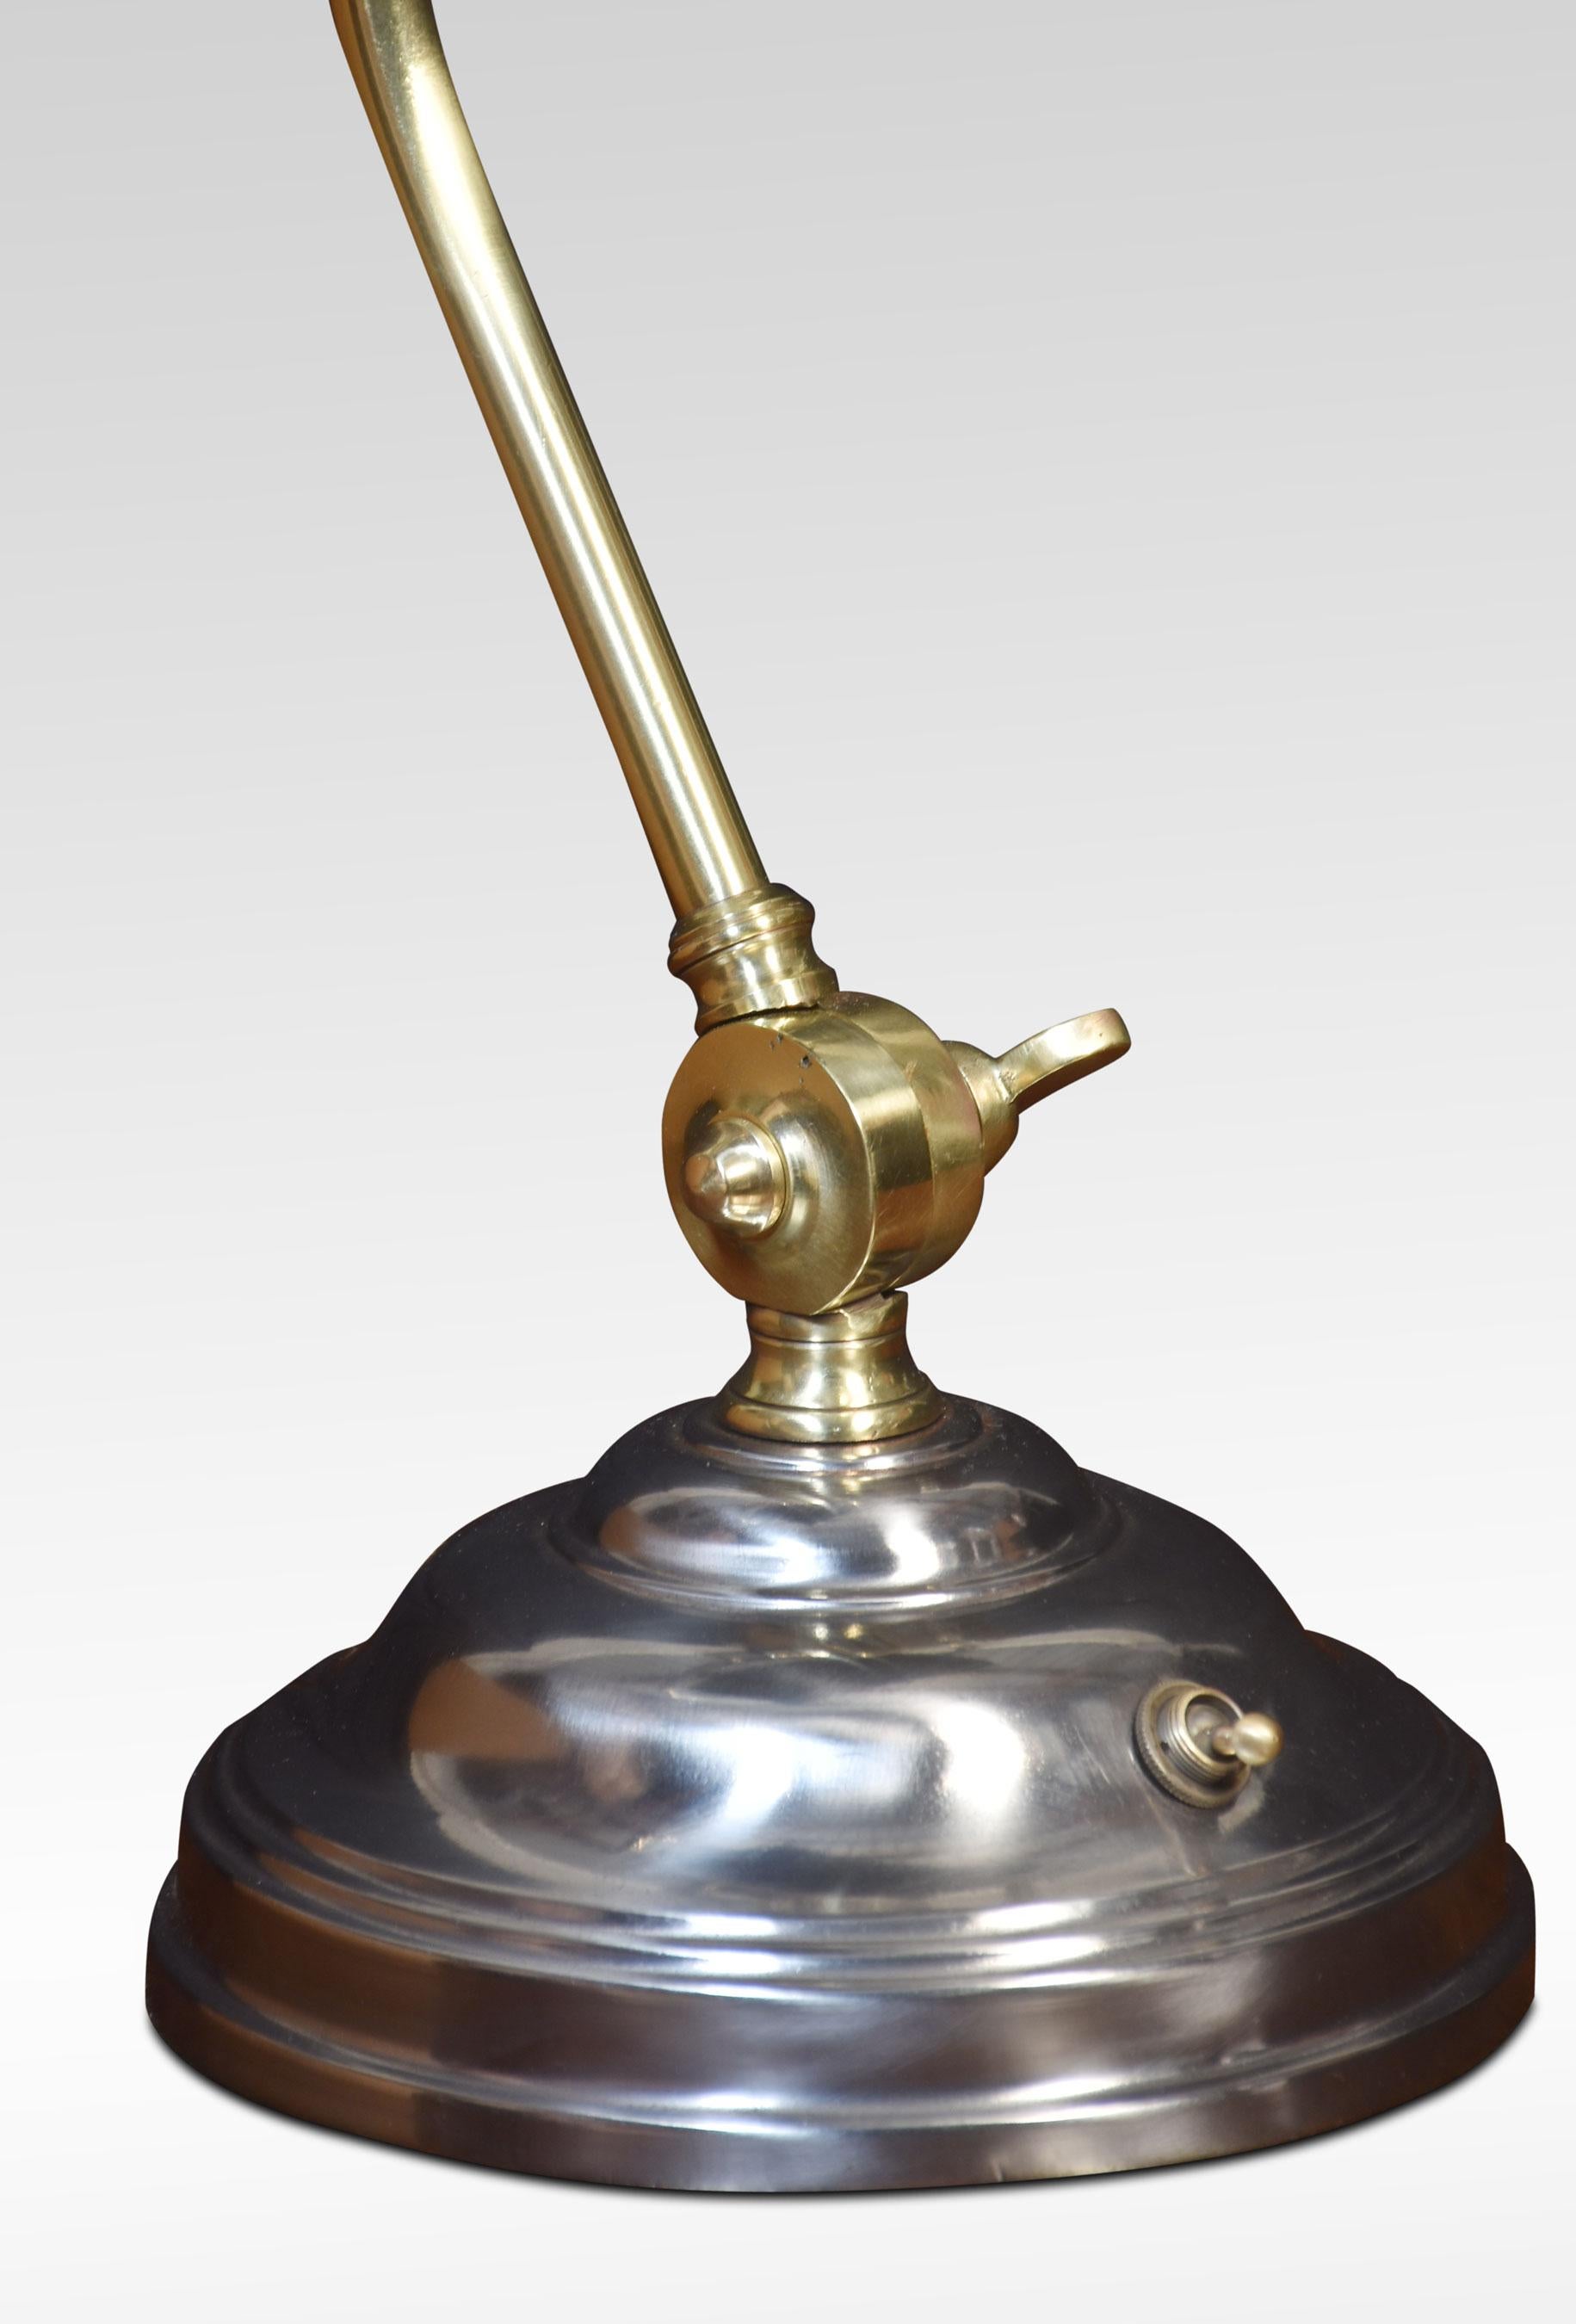 Adjustable Bankers desk lamp, the silvered circular stepped base and brass pivoted sweeping arm supporting adjustable lampshade. The lamp has been rewired.
Dimensions
Height 15.5 Inches
Width 12 Inches
Depth 10 Inches.